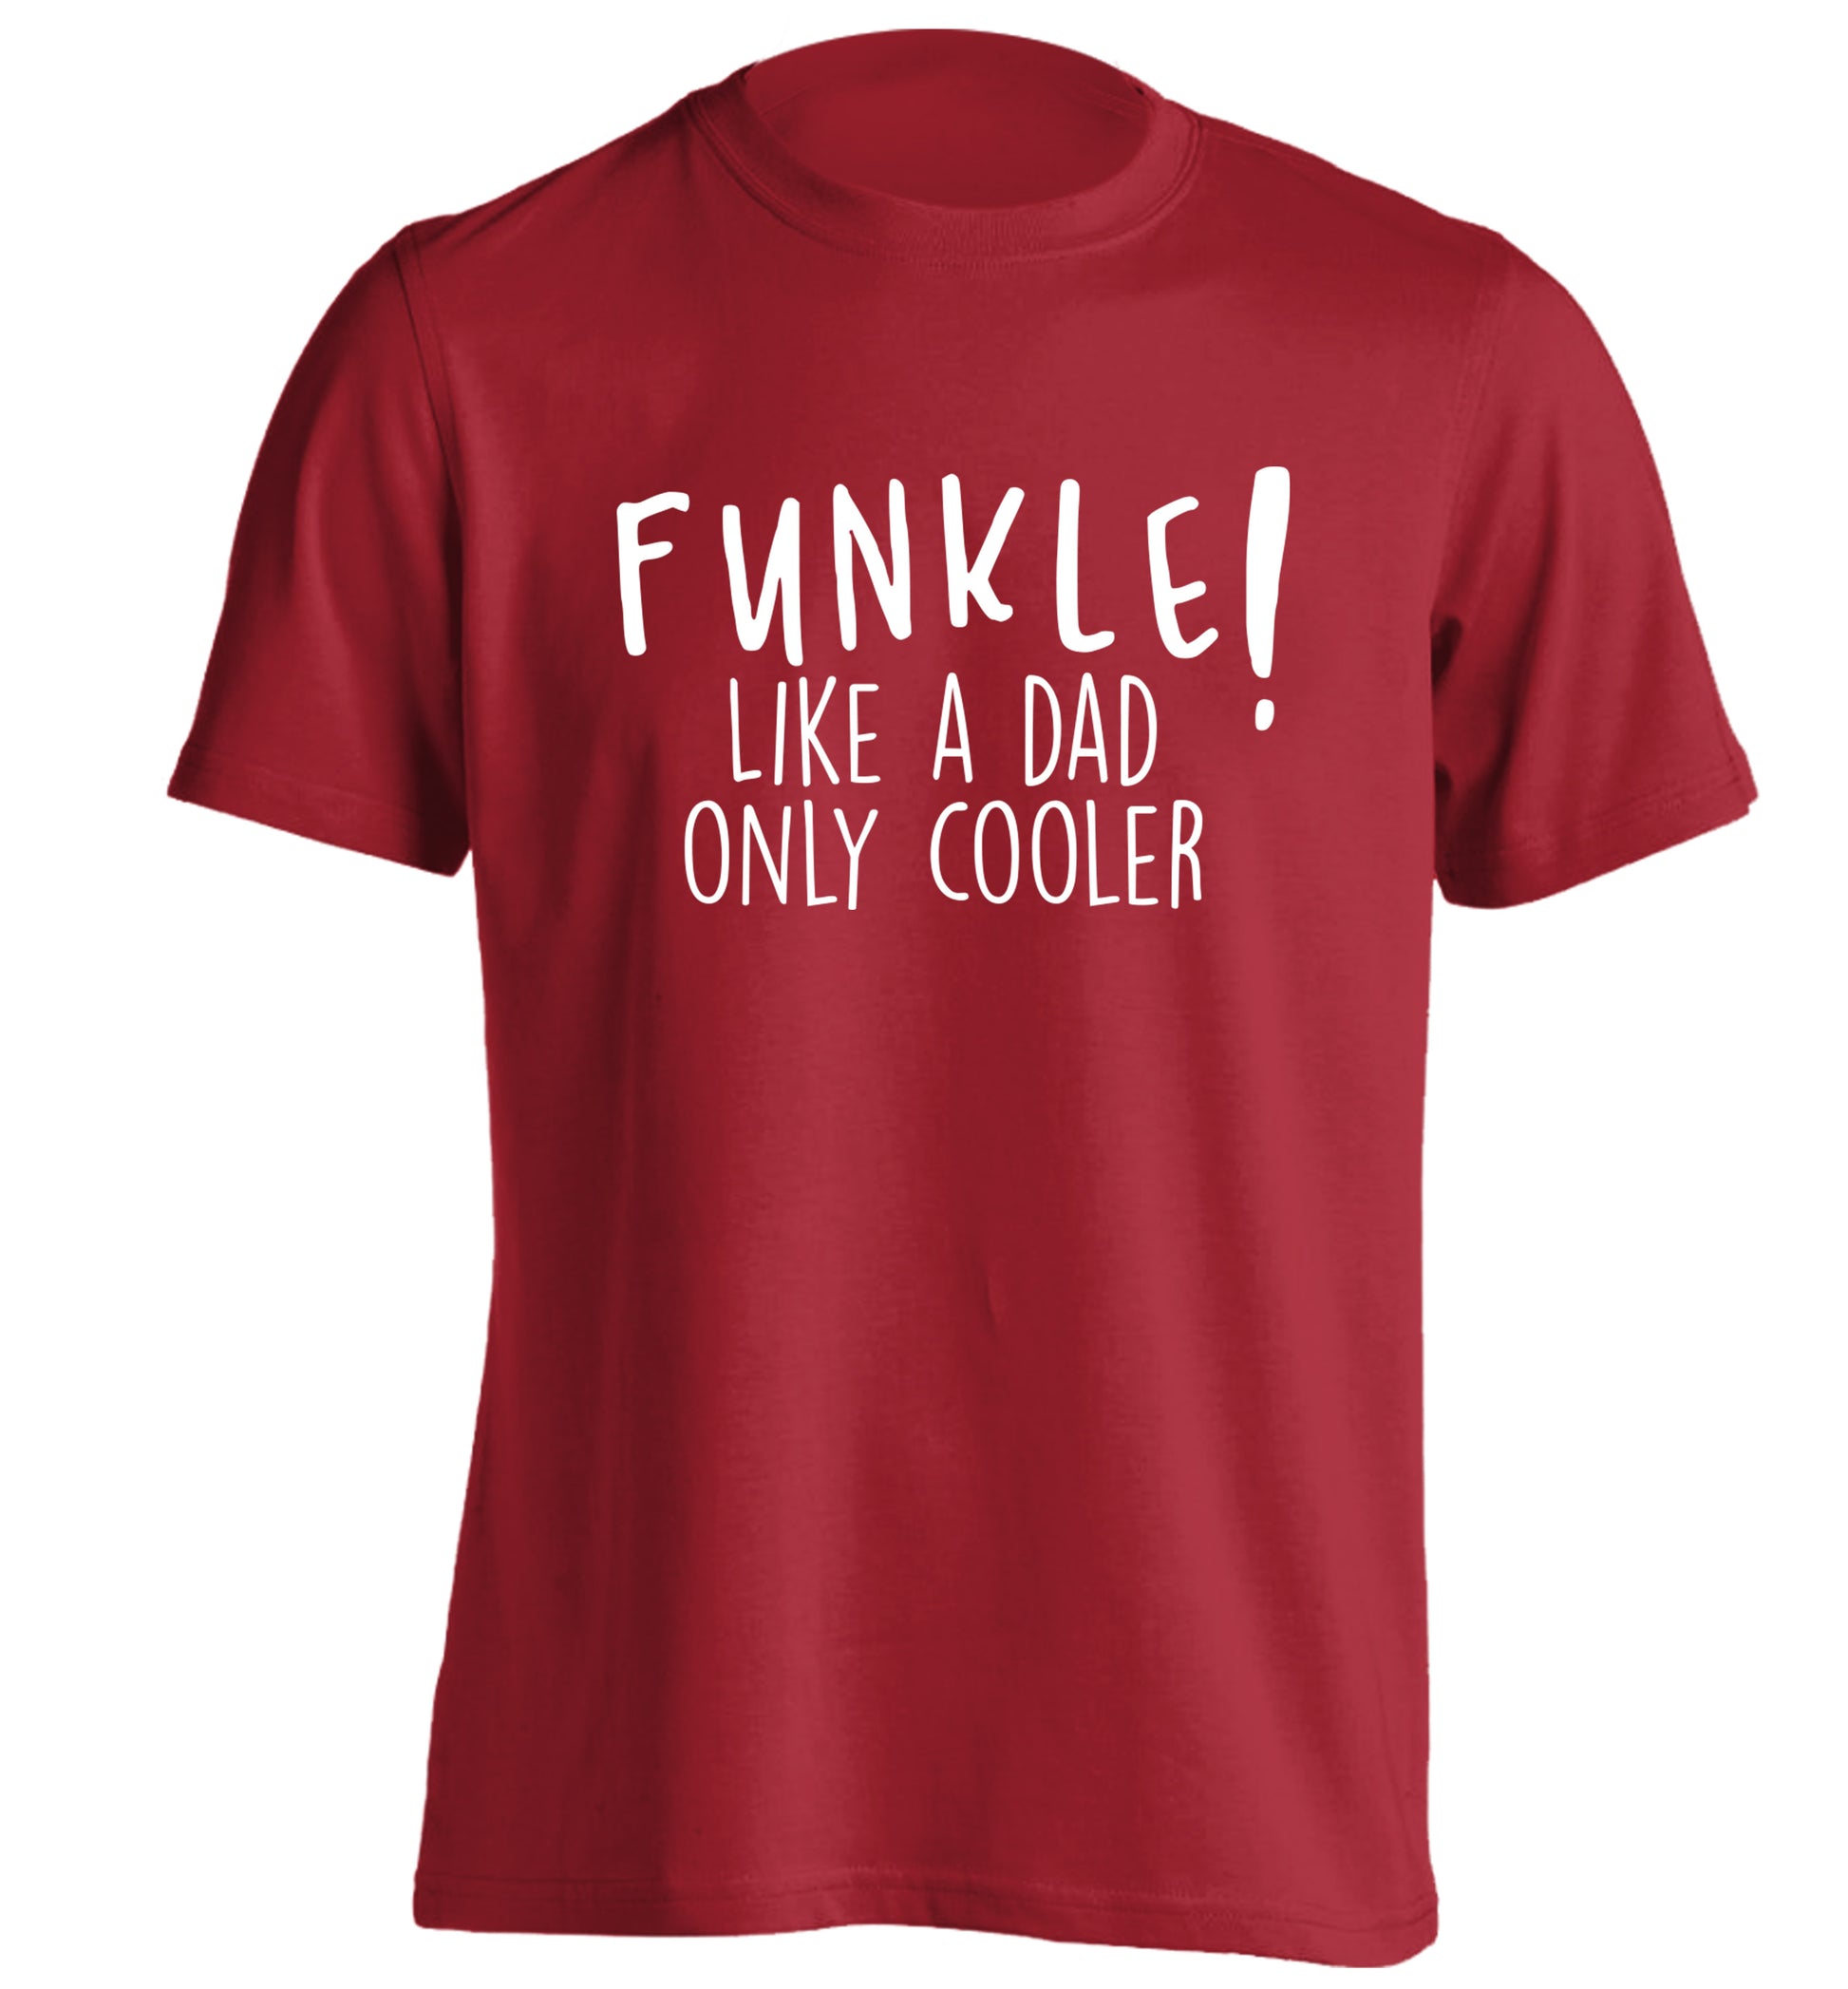 Funkle Like a Dad Only Cooler adults unisex red Tshirt 2XL